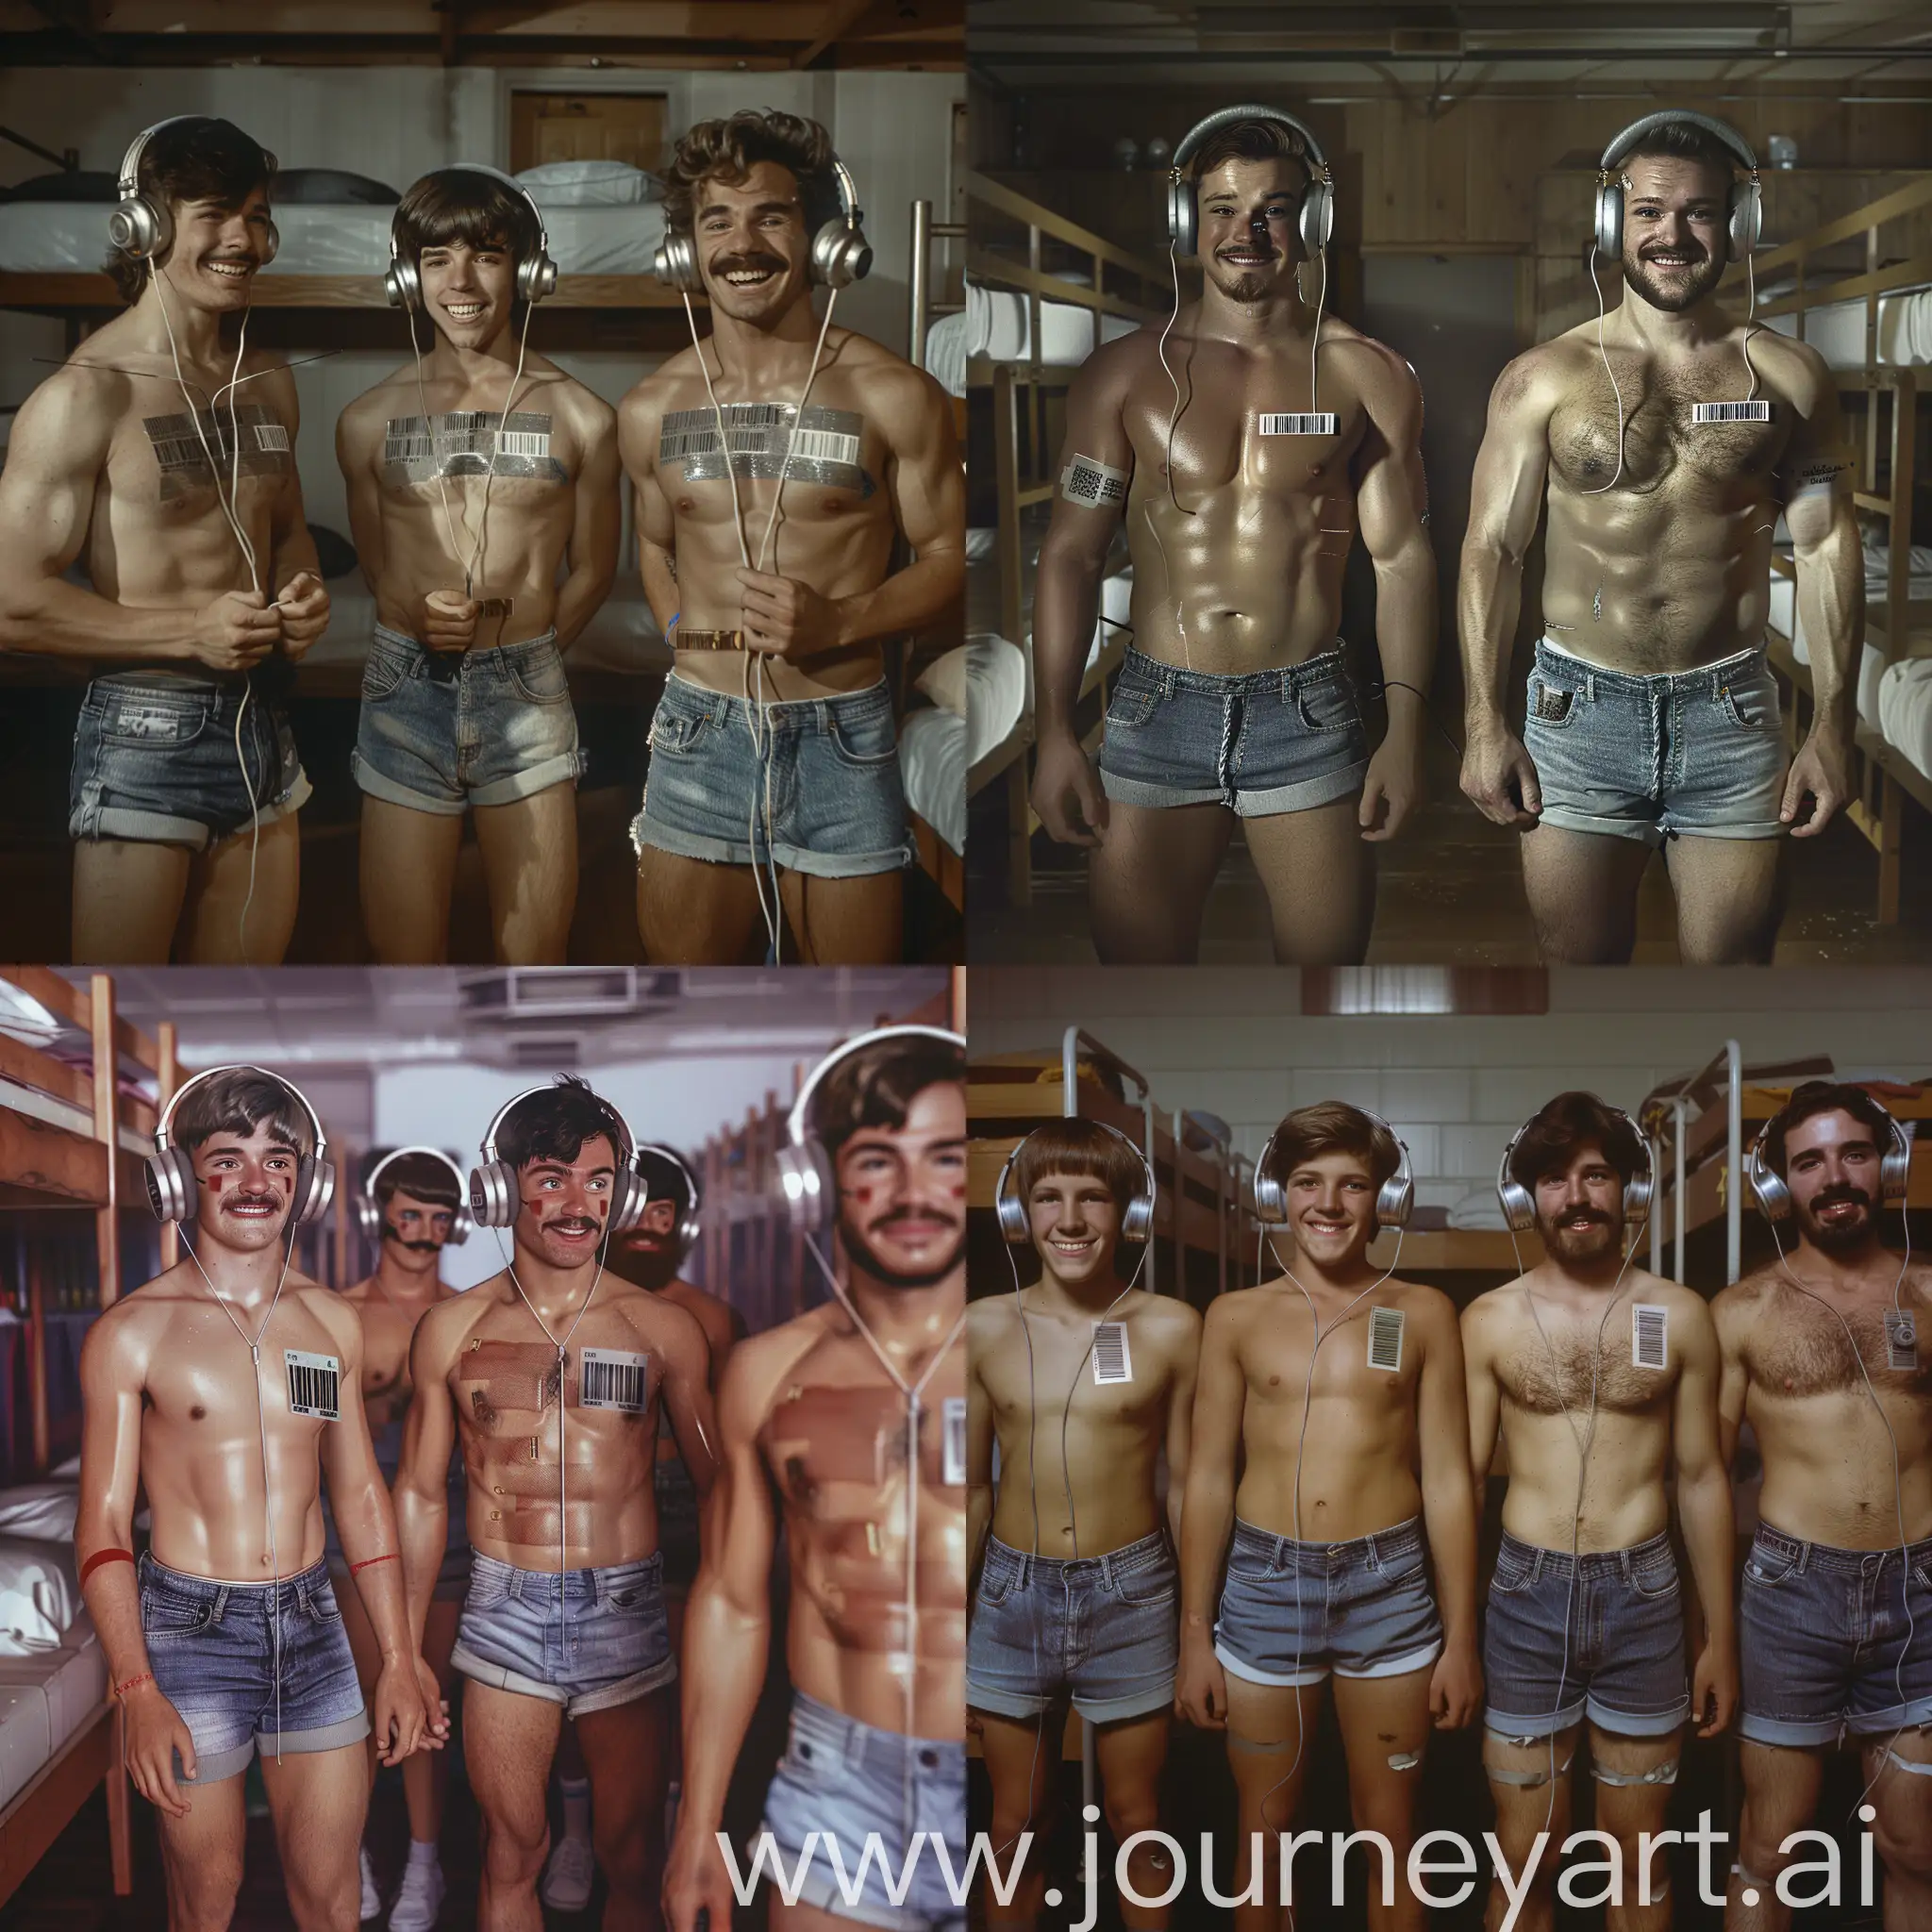 Handsome muscular teenage boys and handsome muscular middle-aged men each wear silver headphones and fitted cutoff denim shorts, dazed smiles, small barcode attached to each man's chest, 1980s youth hostel dorm with bunkbeds setting, facial hair, facing the viewer, mass indoctrination, color image, hyperrealistic, cinematic
